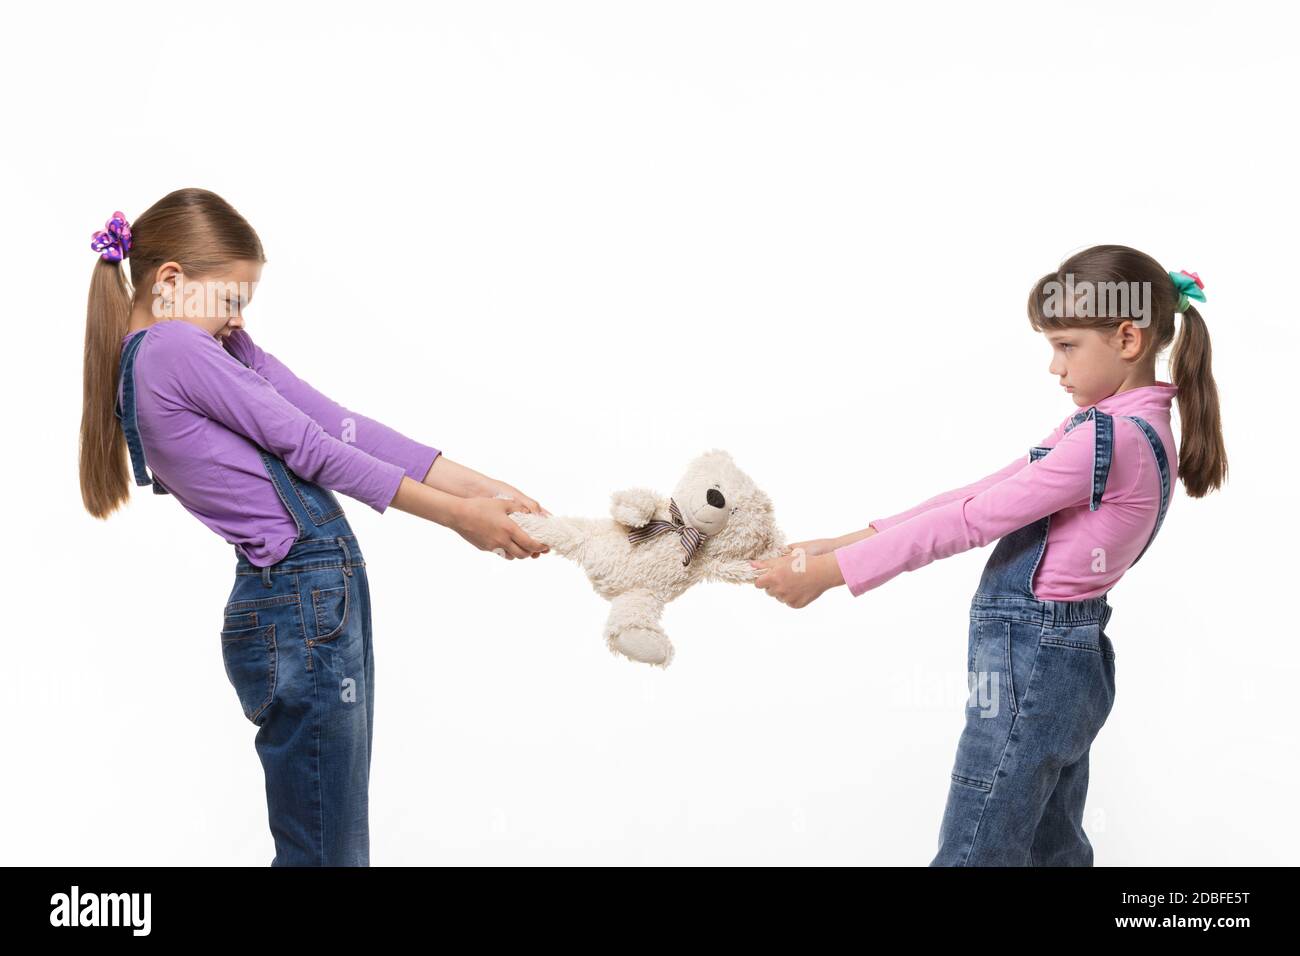 Girls pull teddy bear at each other on white background Stock Photo - Alamy